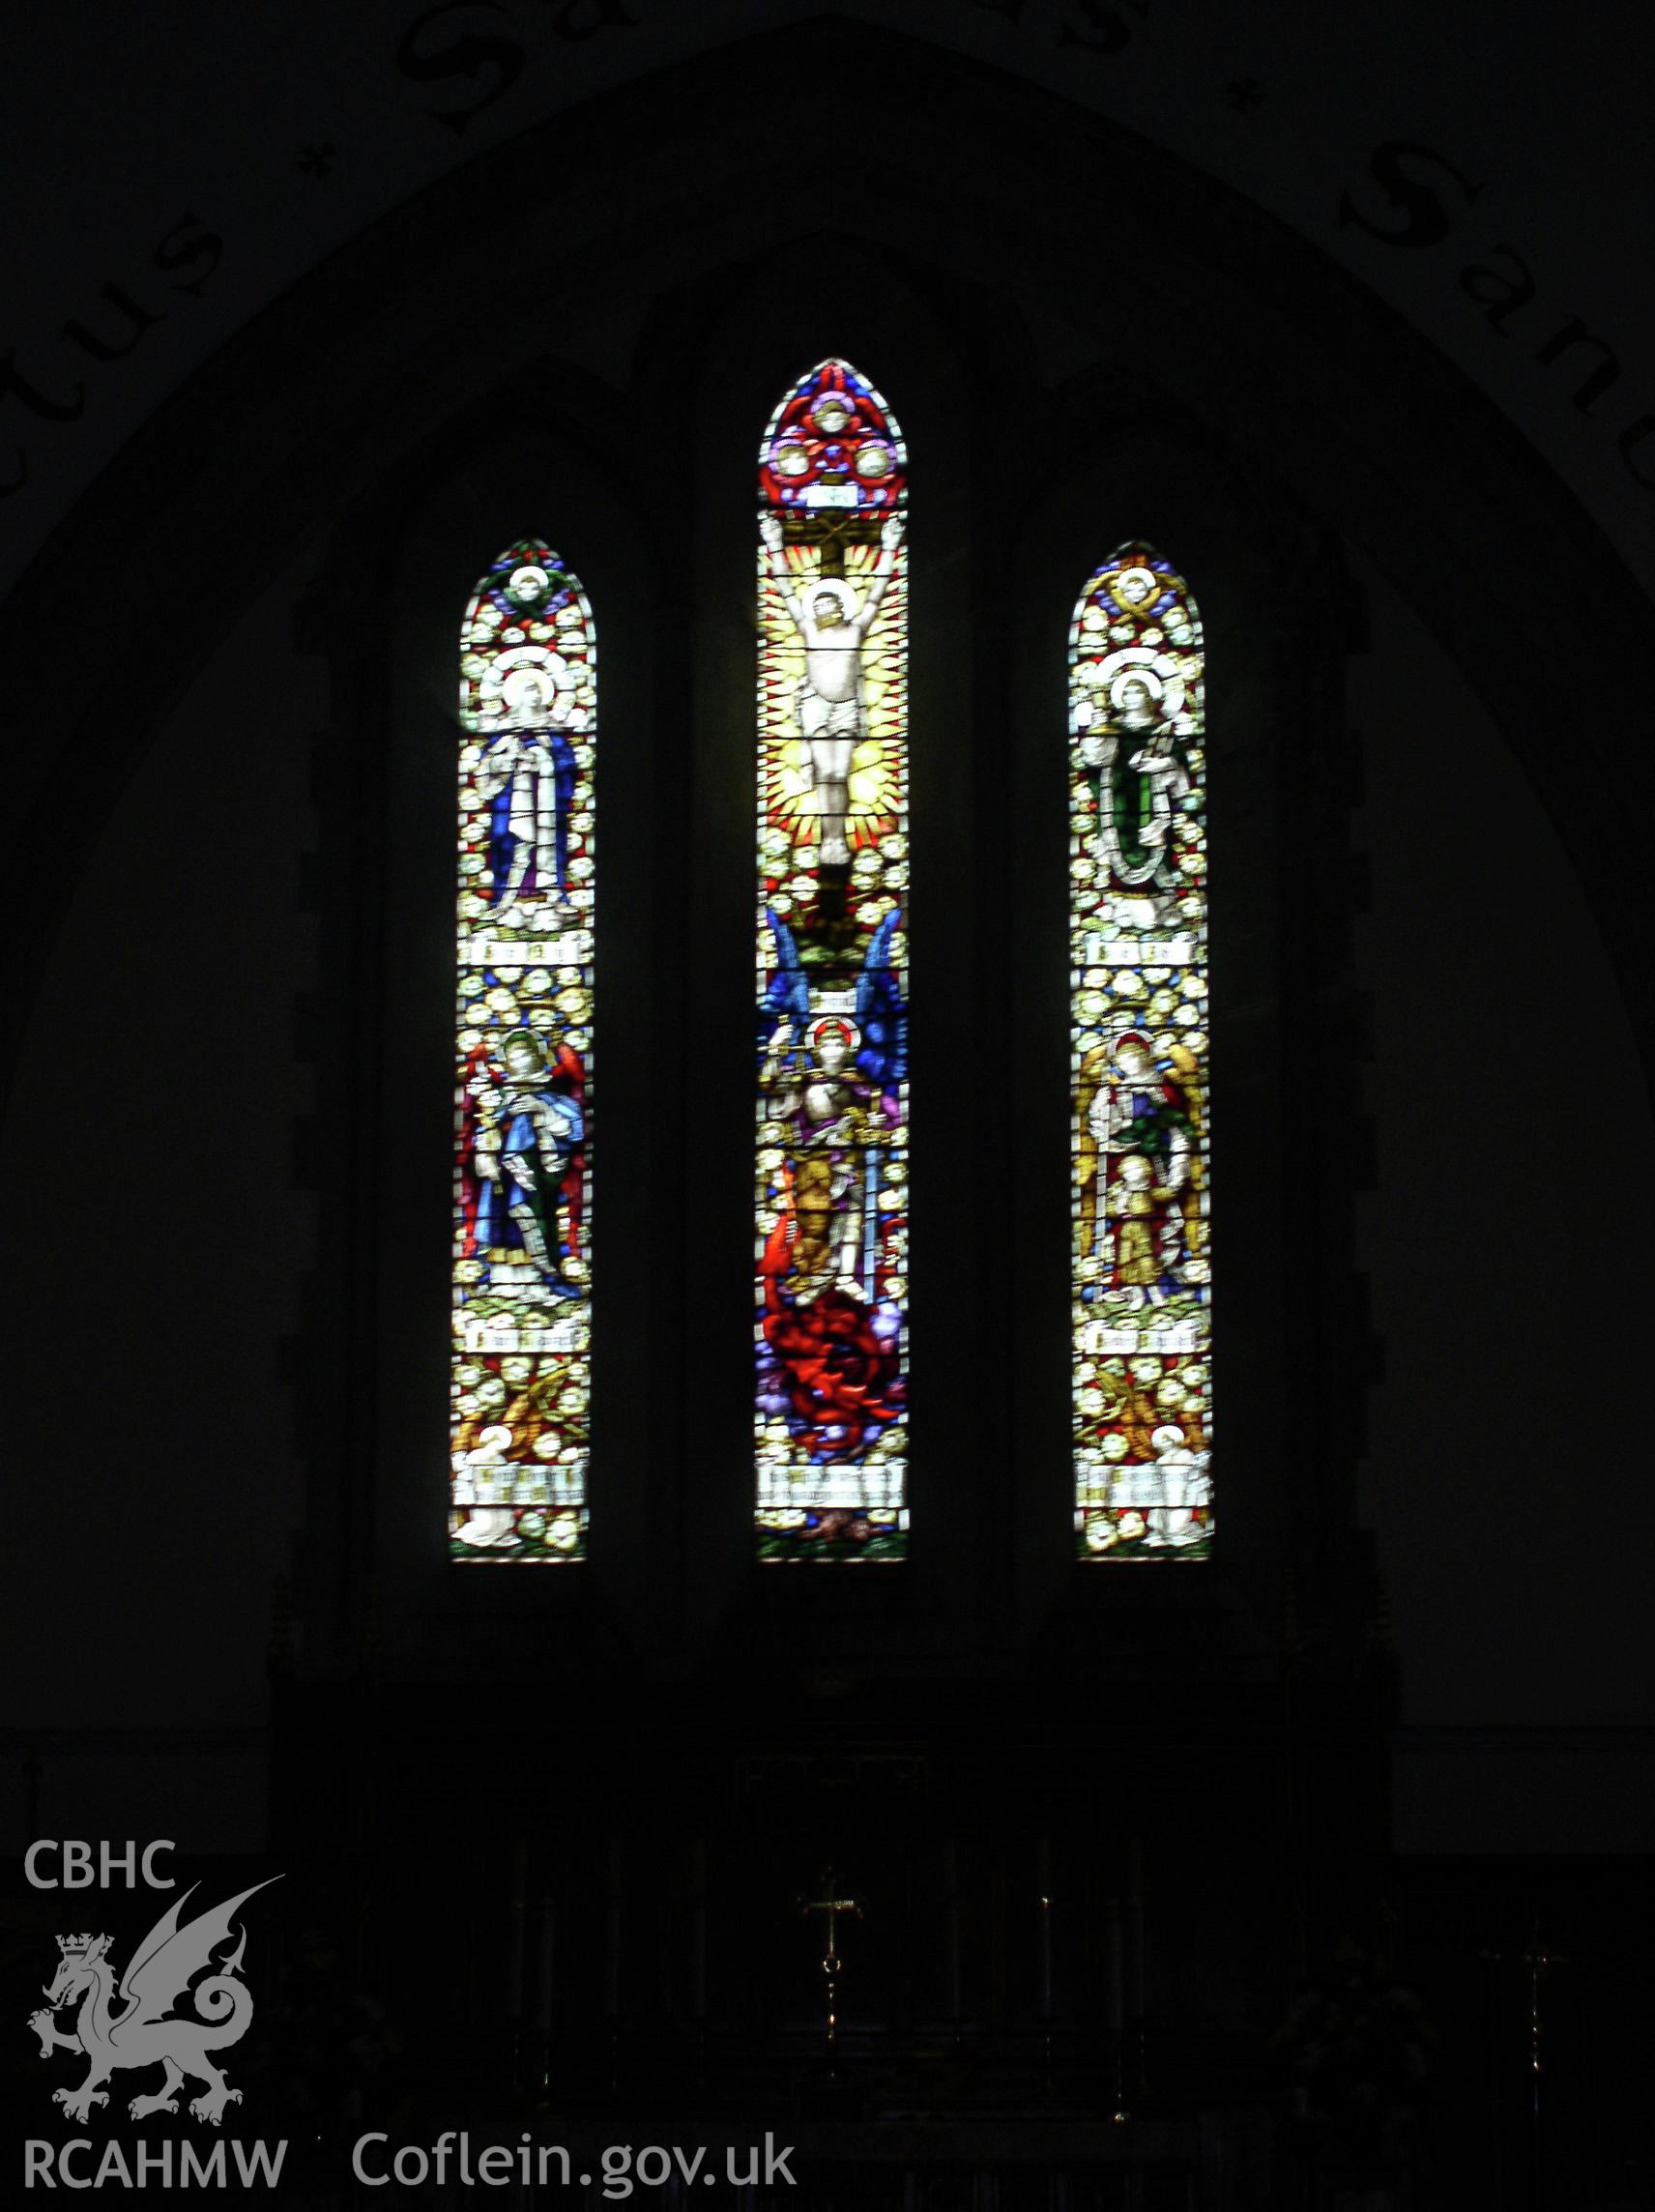 Colour digital photograph showing a stained glass window at St Michael and All Angel's Church, Maesteg; Glamorgan.